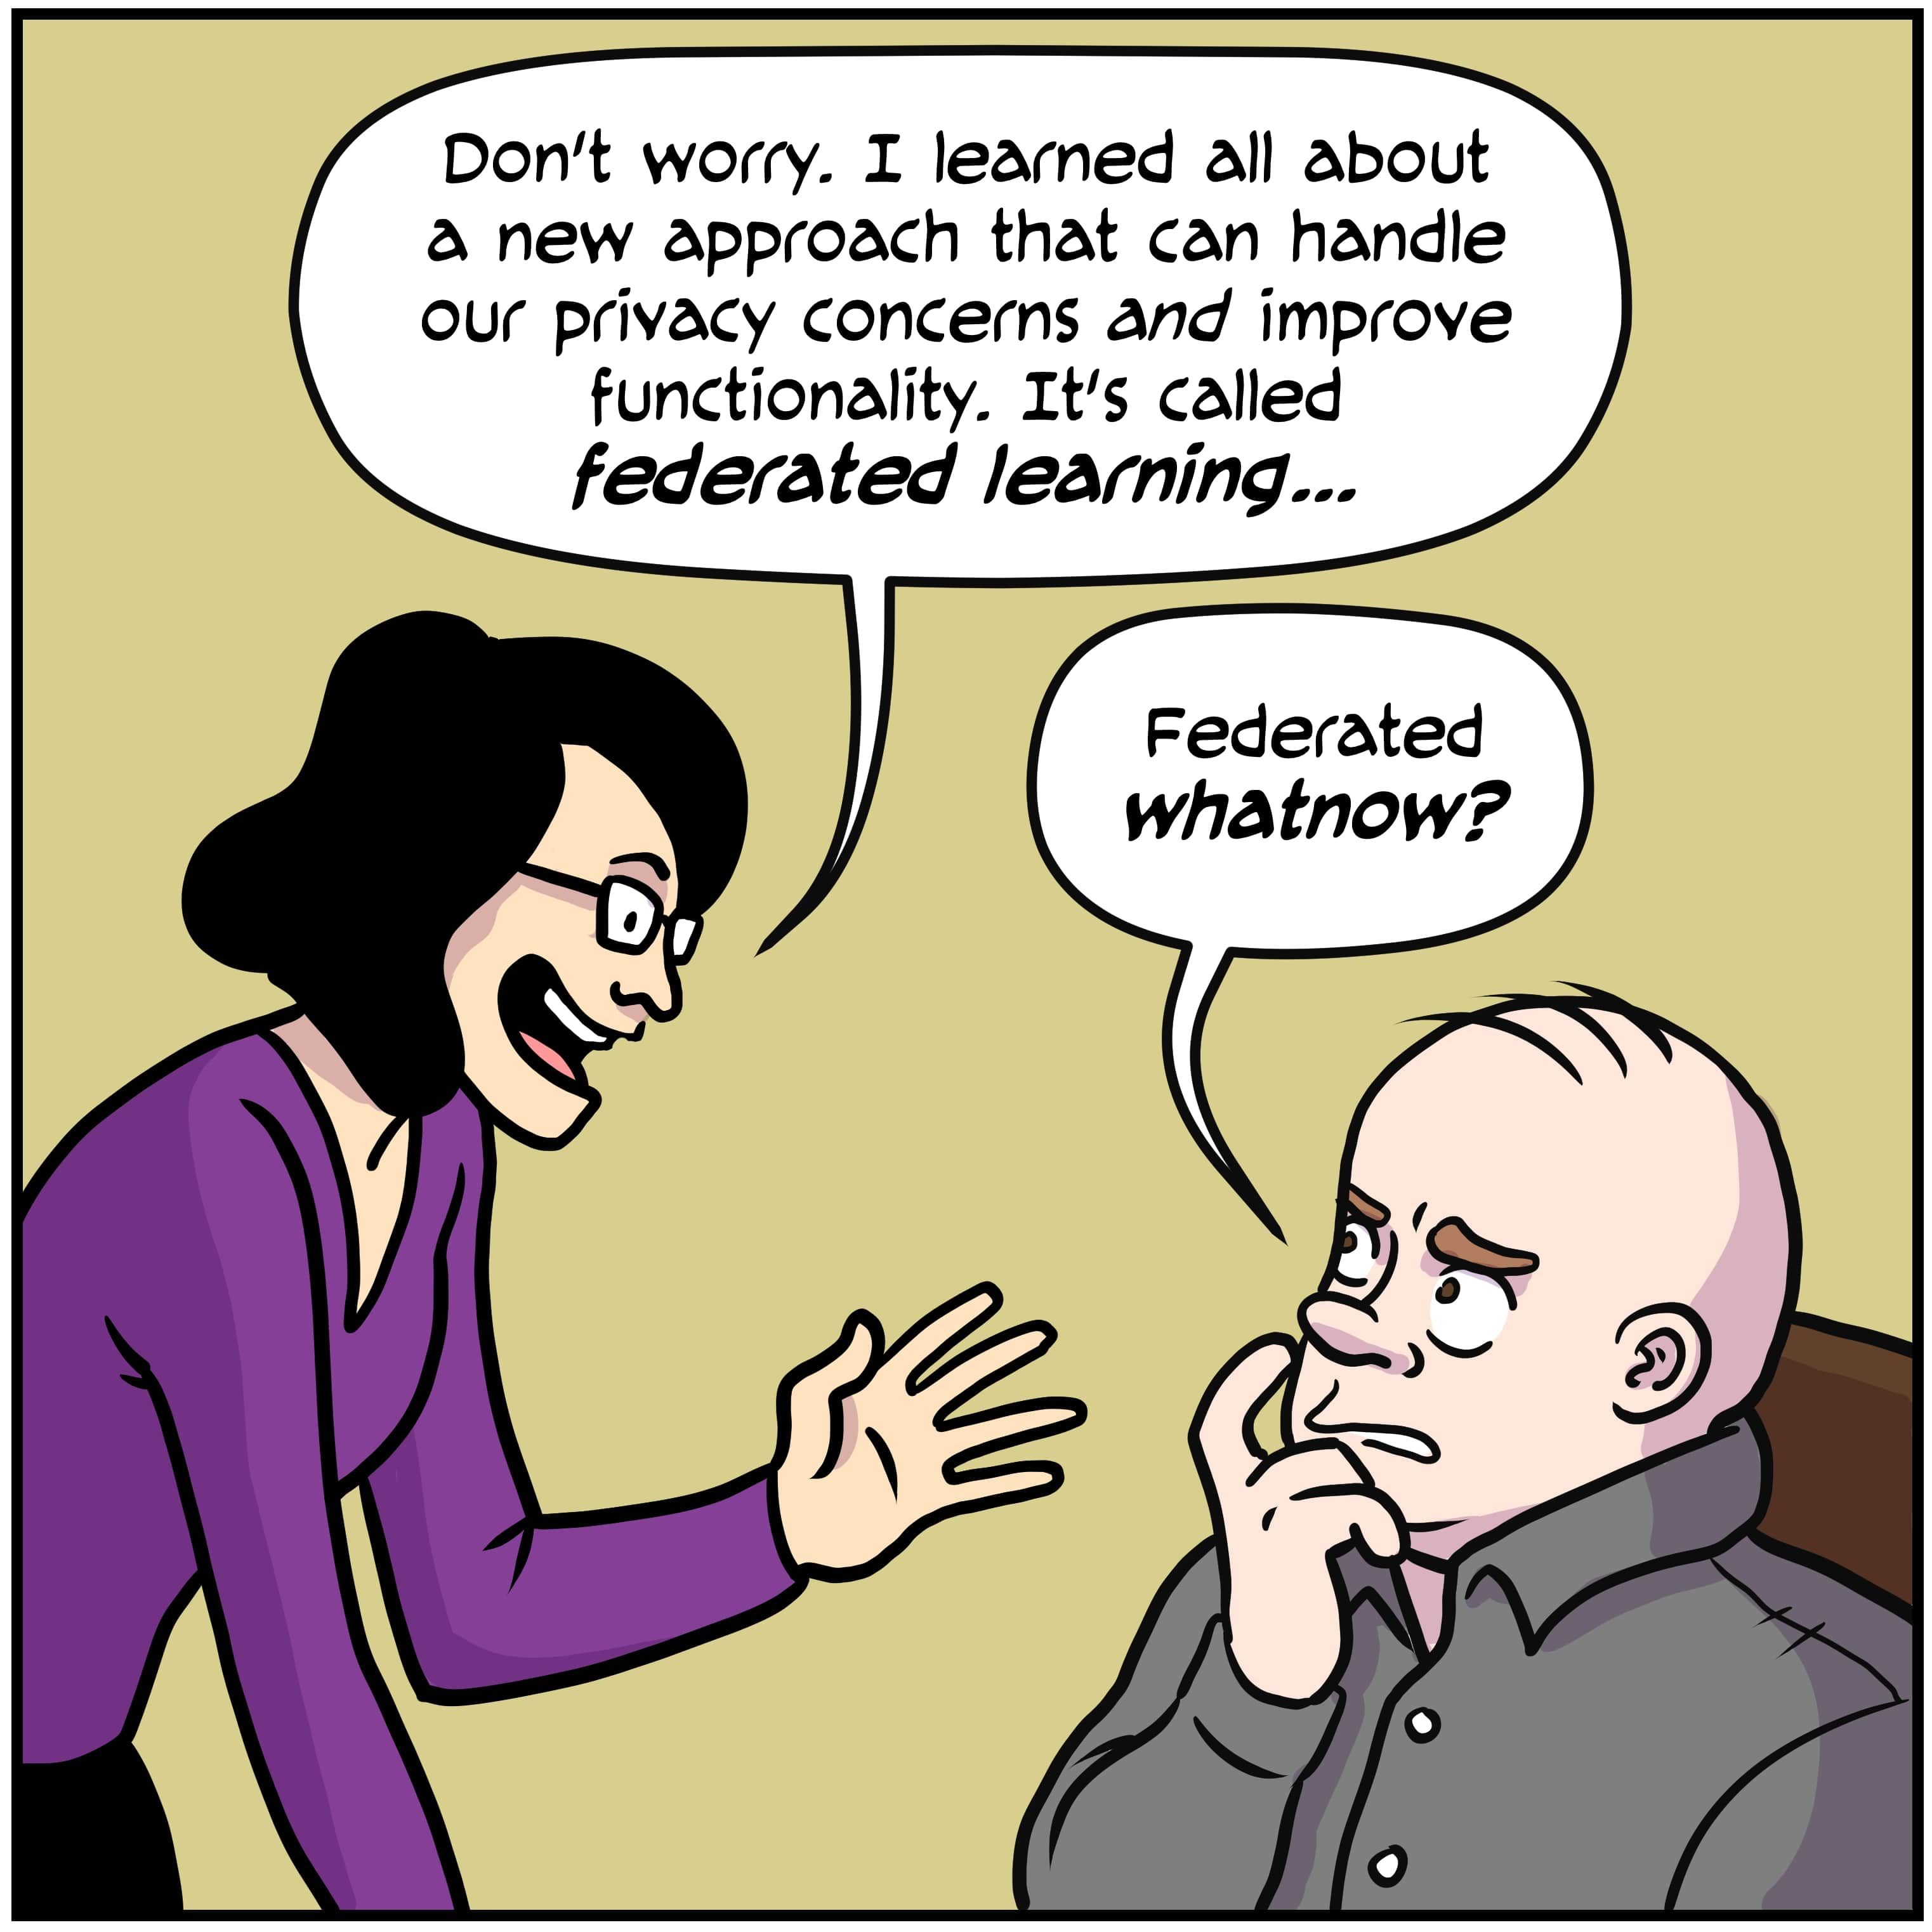 A comic panel showing a person introducing 'federated learning' to a puzzled colleague.